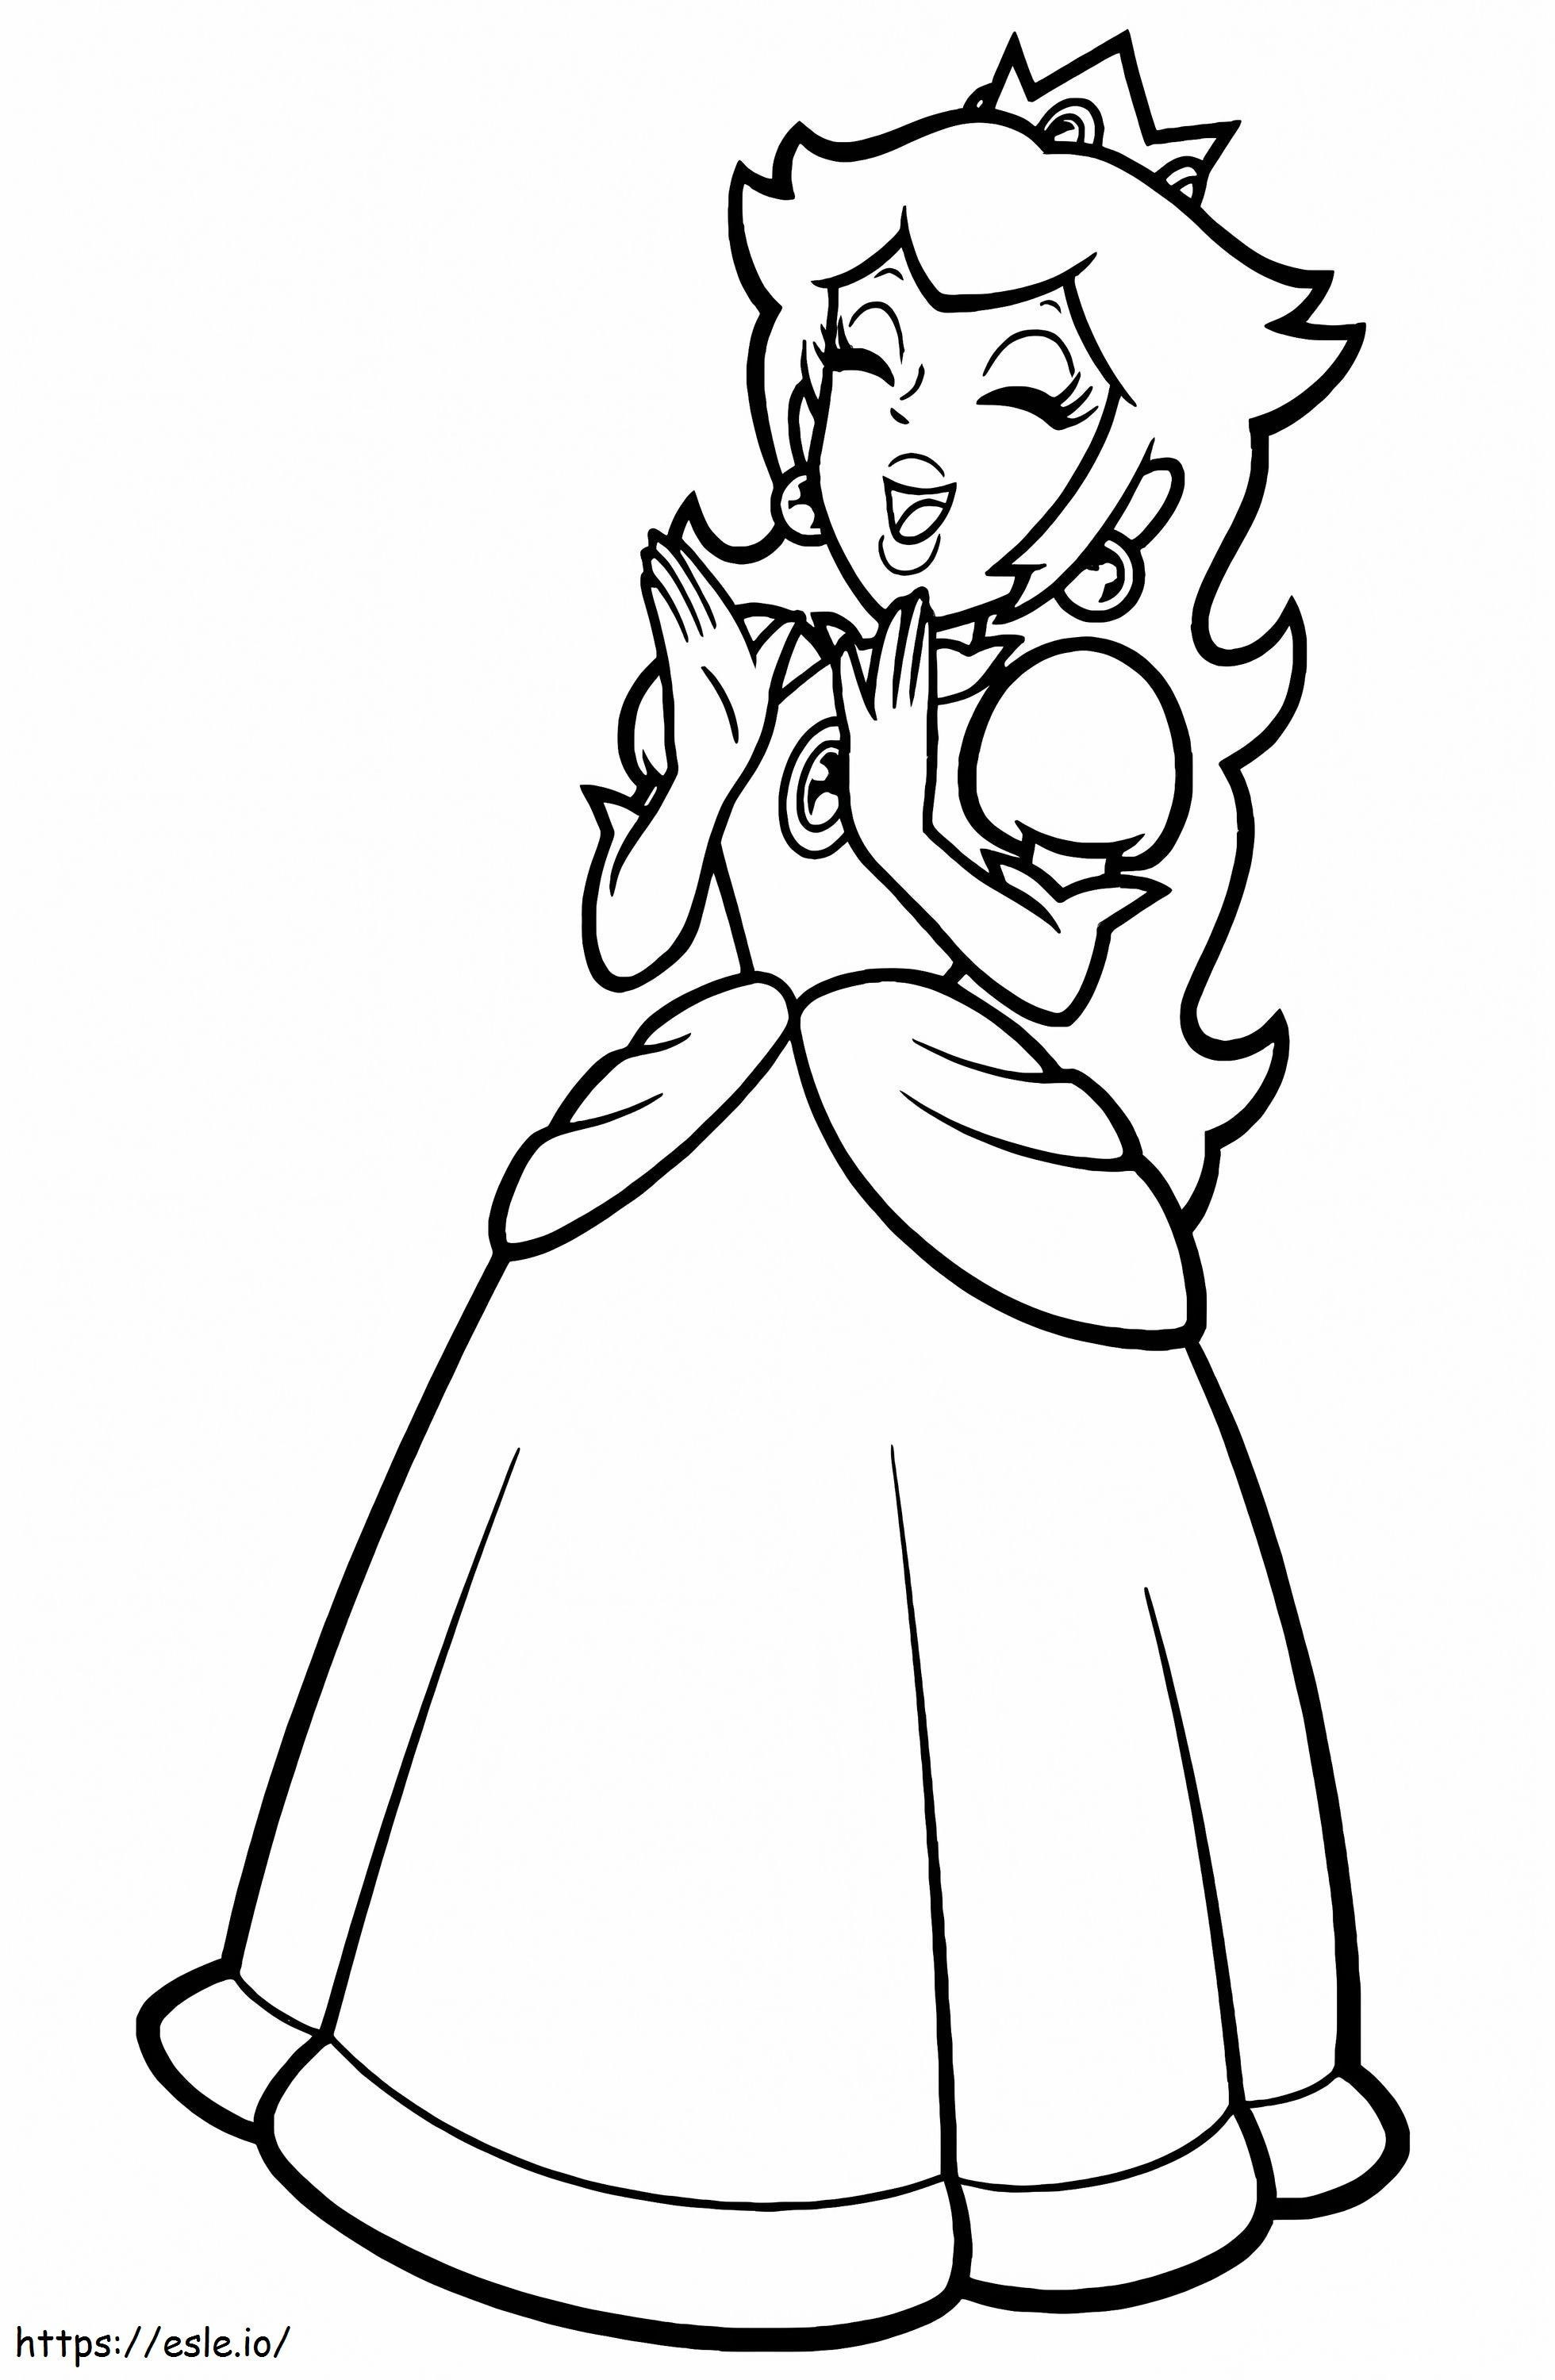 Princess Peach Clapping coloring page